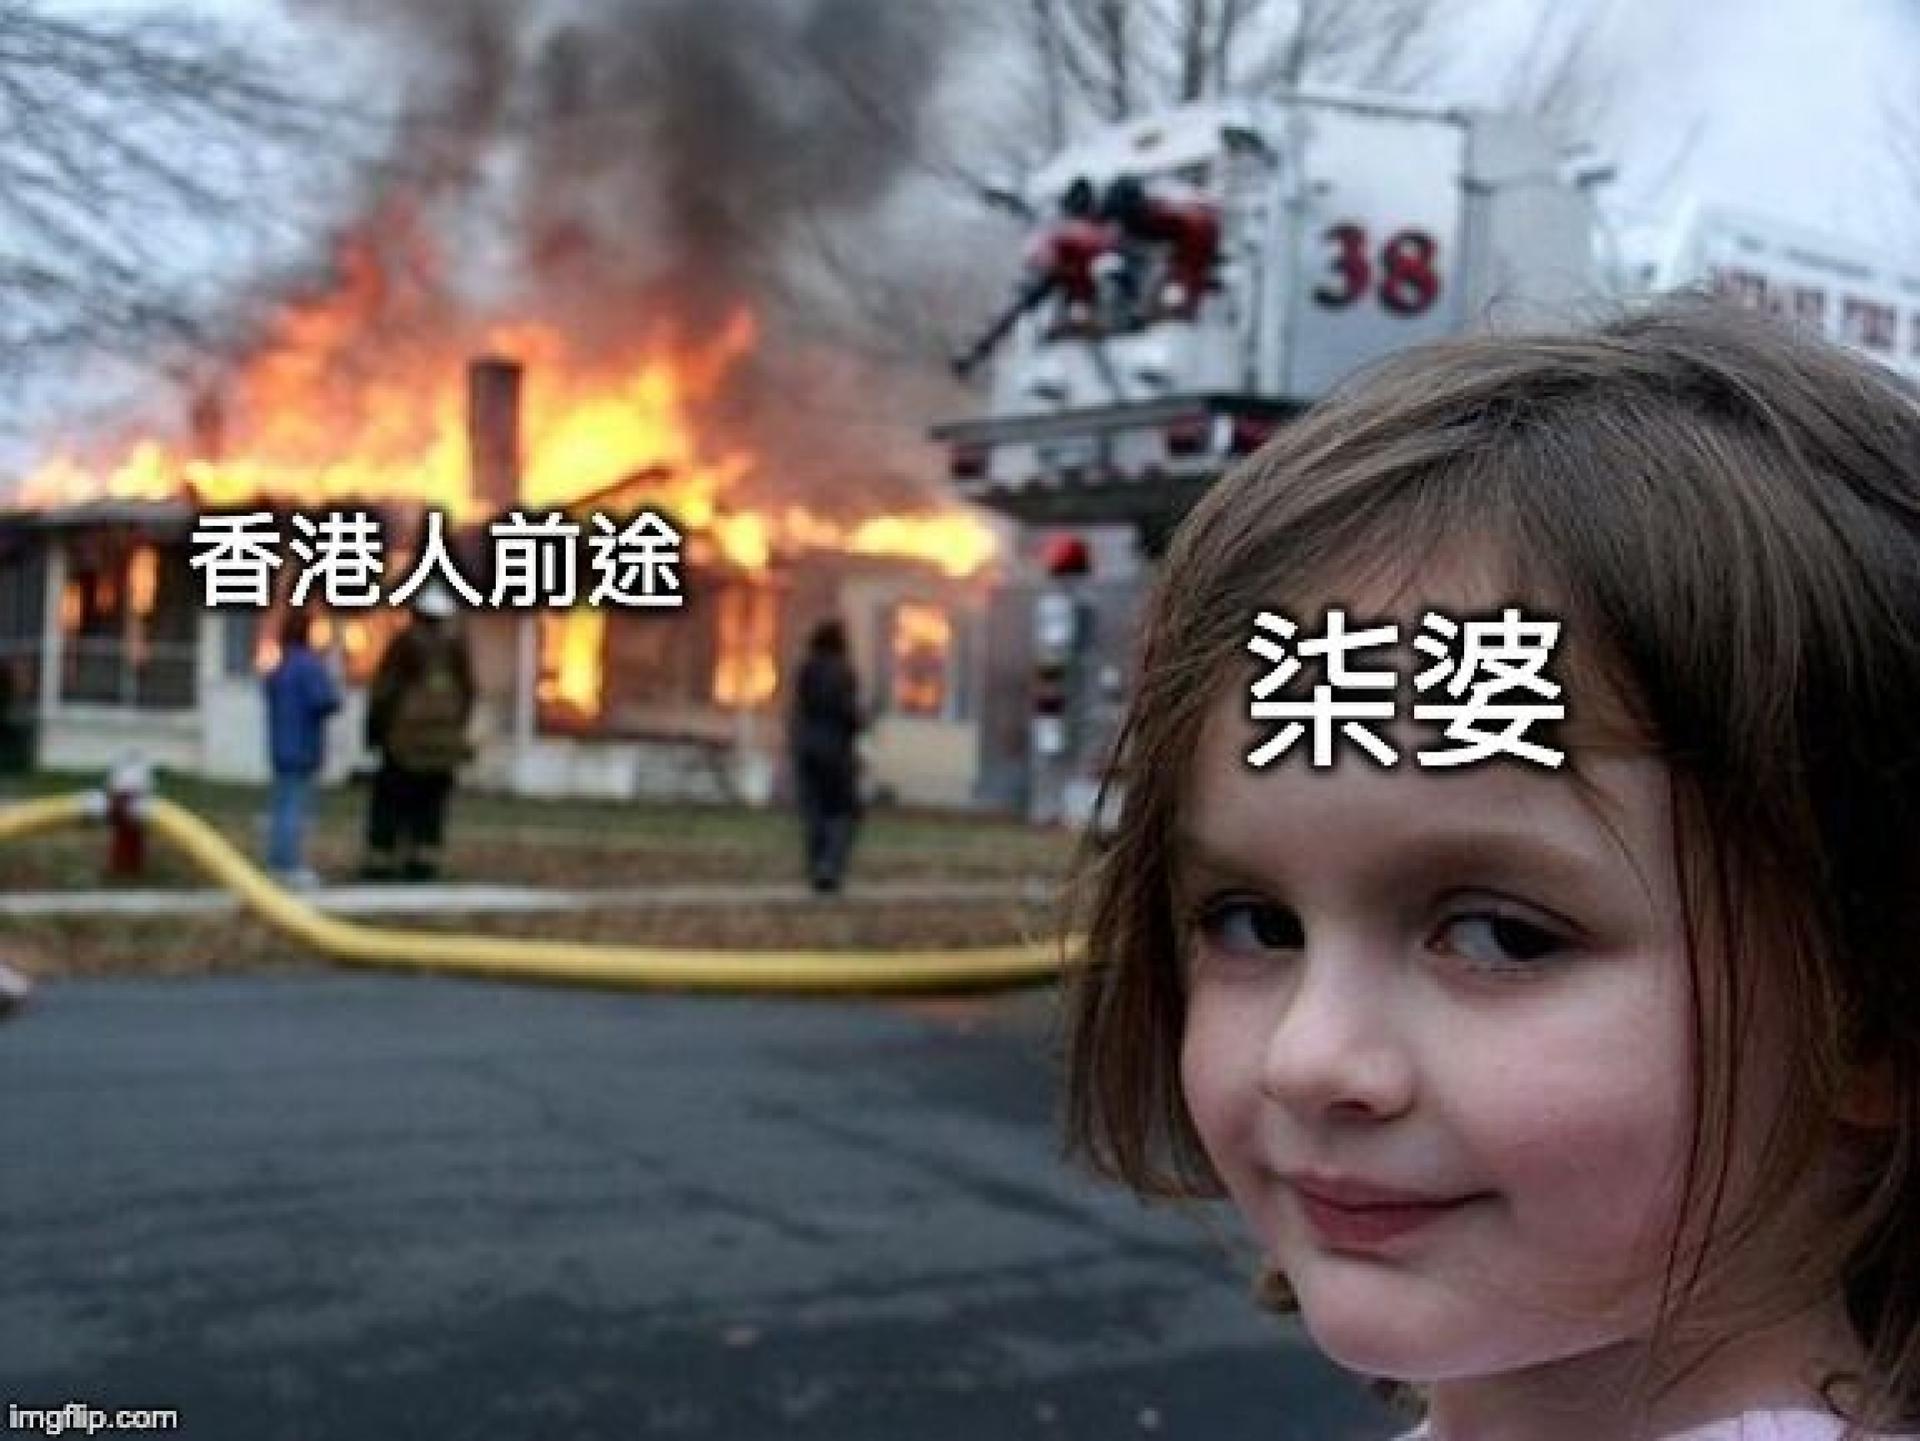 A version of the disaster girl meme with Chinese characters on it. There is a girl smiling at the camera while a home burns behind her.